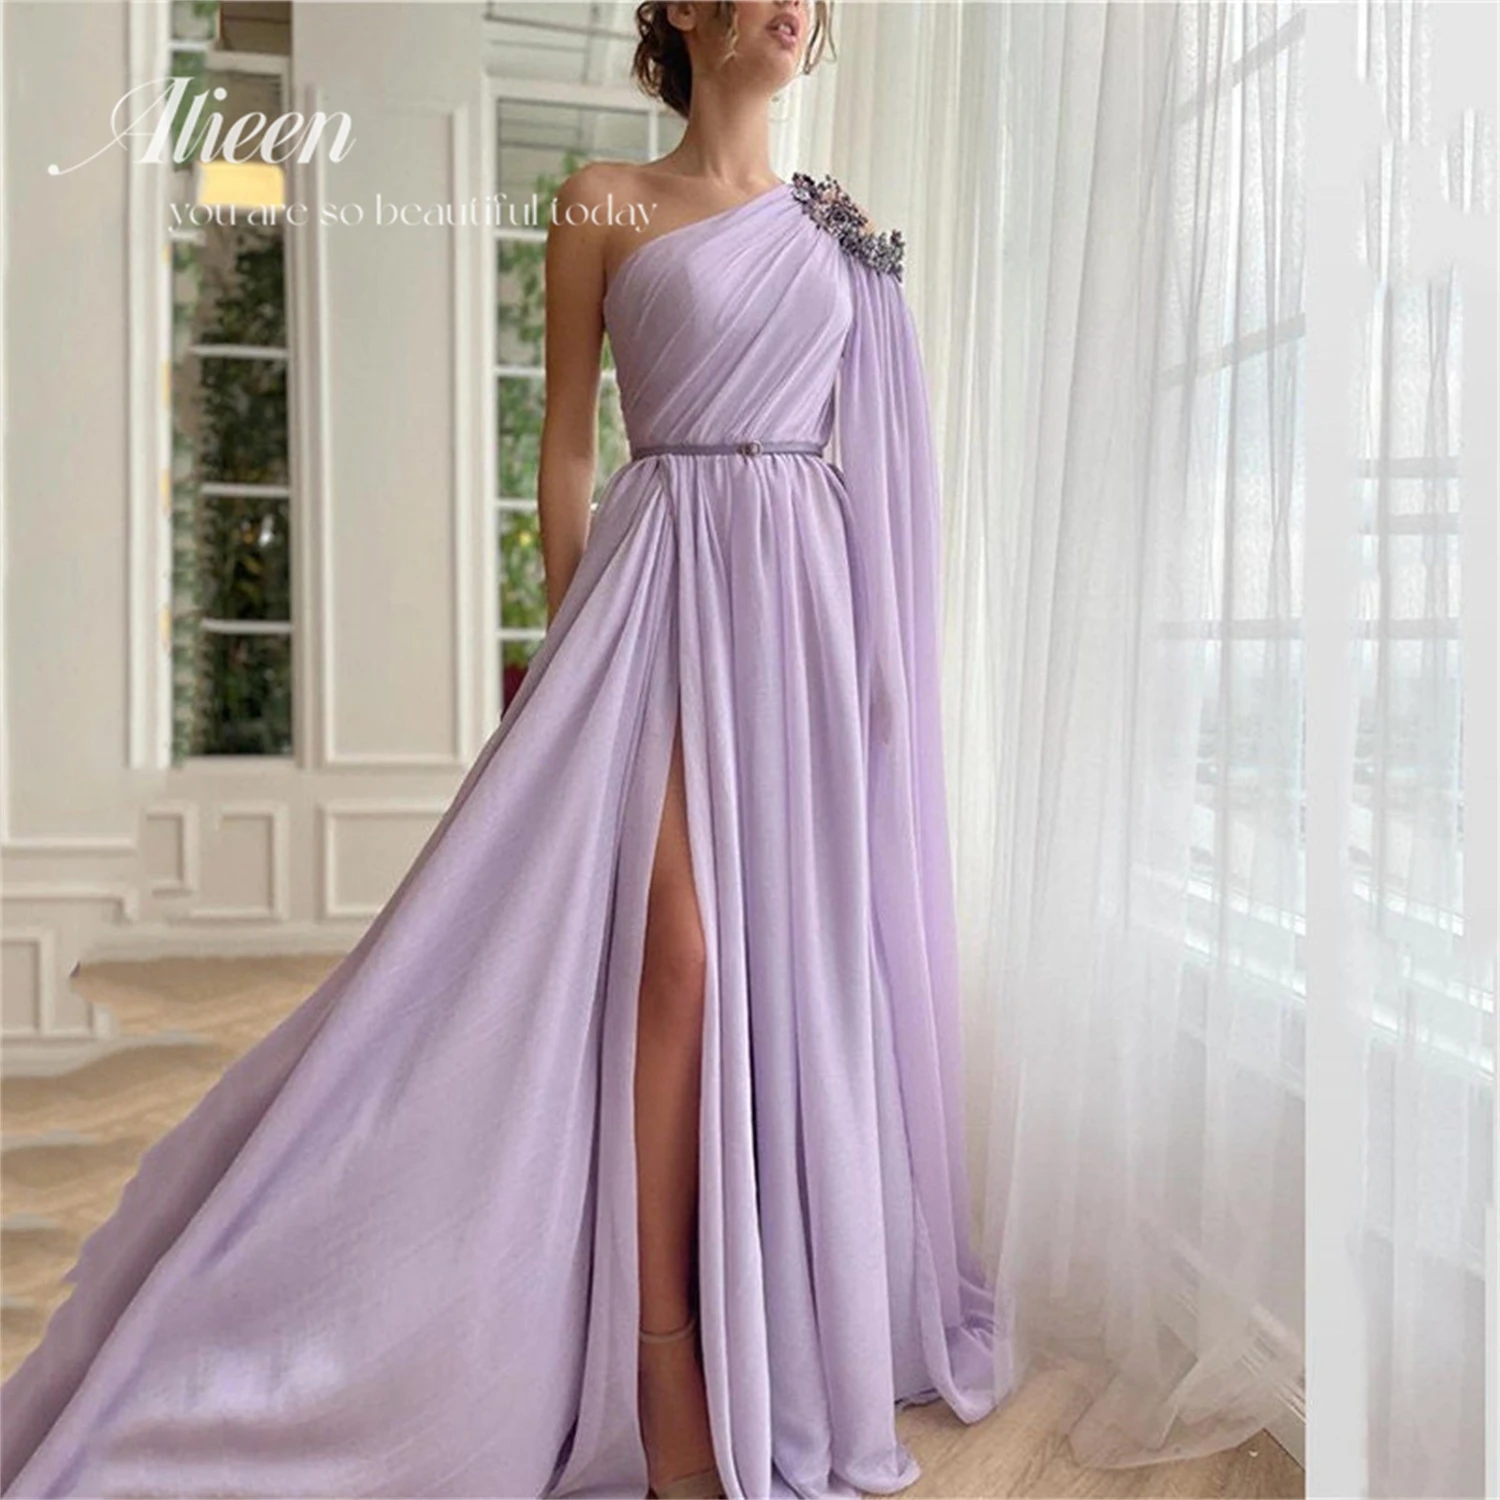 

Aileen Elegant Lavender Chiffon Prom Dresses Beading Crystal One Shoulder High Side Split A-Line Arabic Party Evening Gowns